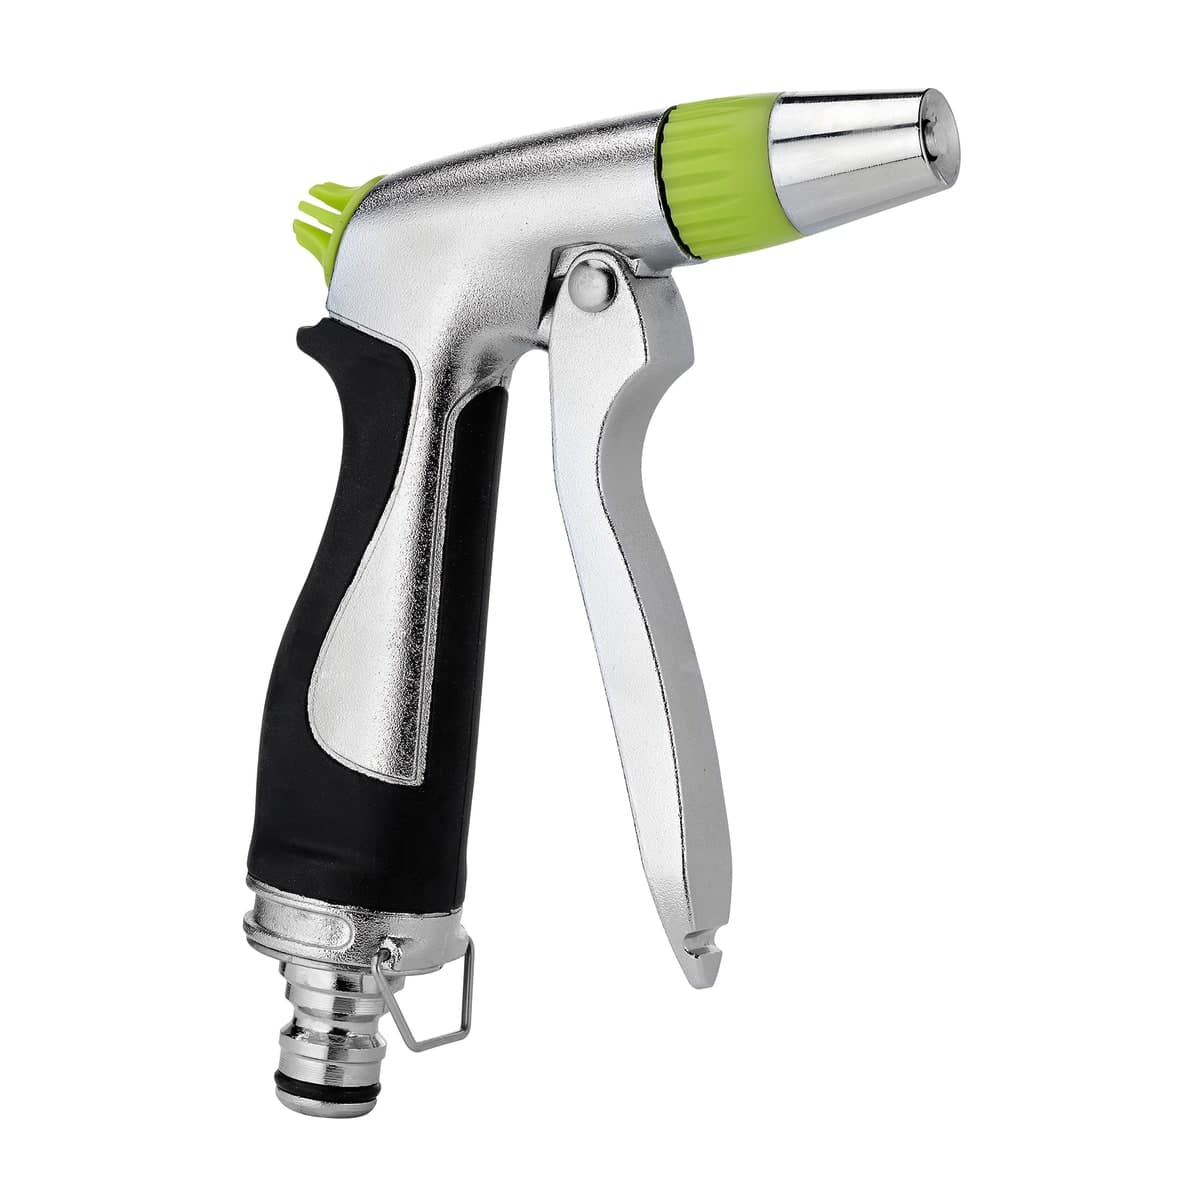 DELUX CHROME-PLATED METAL PISTOL WITH COMFORT GRIP AND COLOUR-ADJUSTABLE SPRAY JET